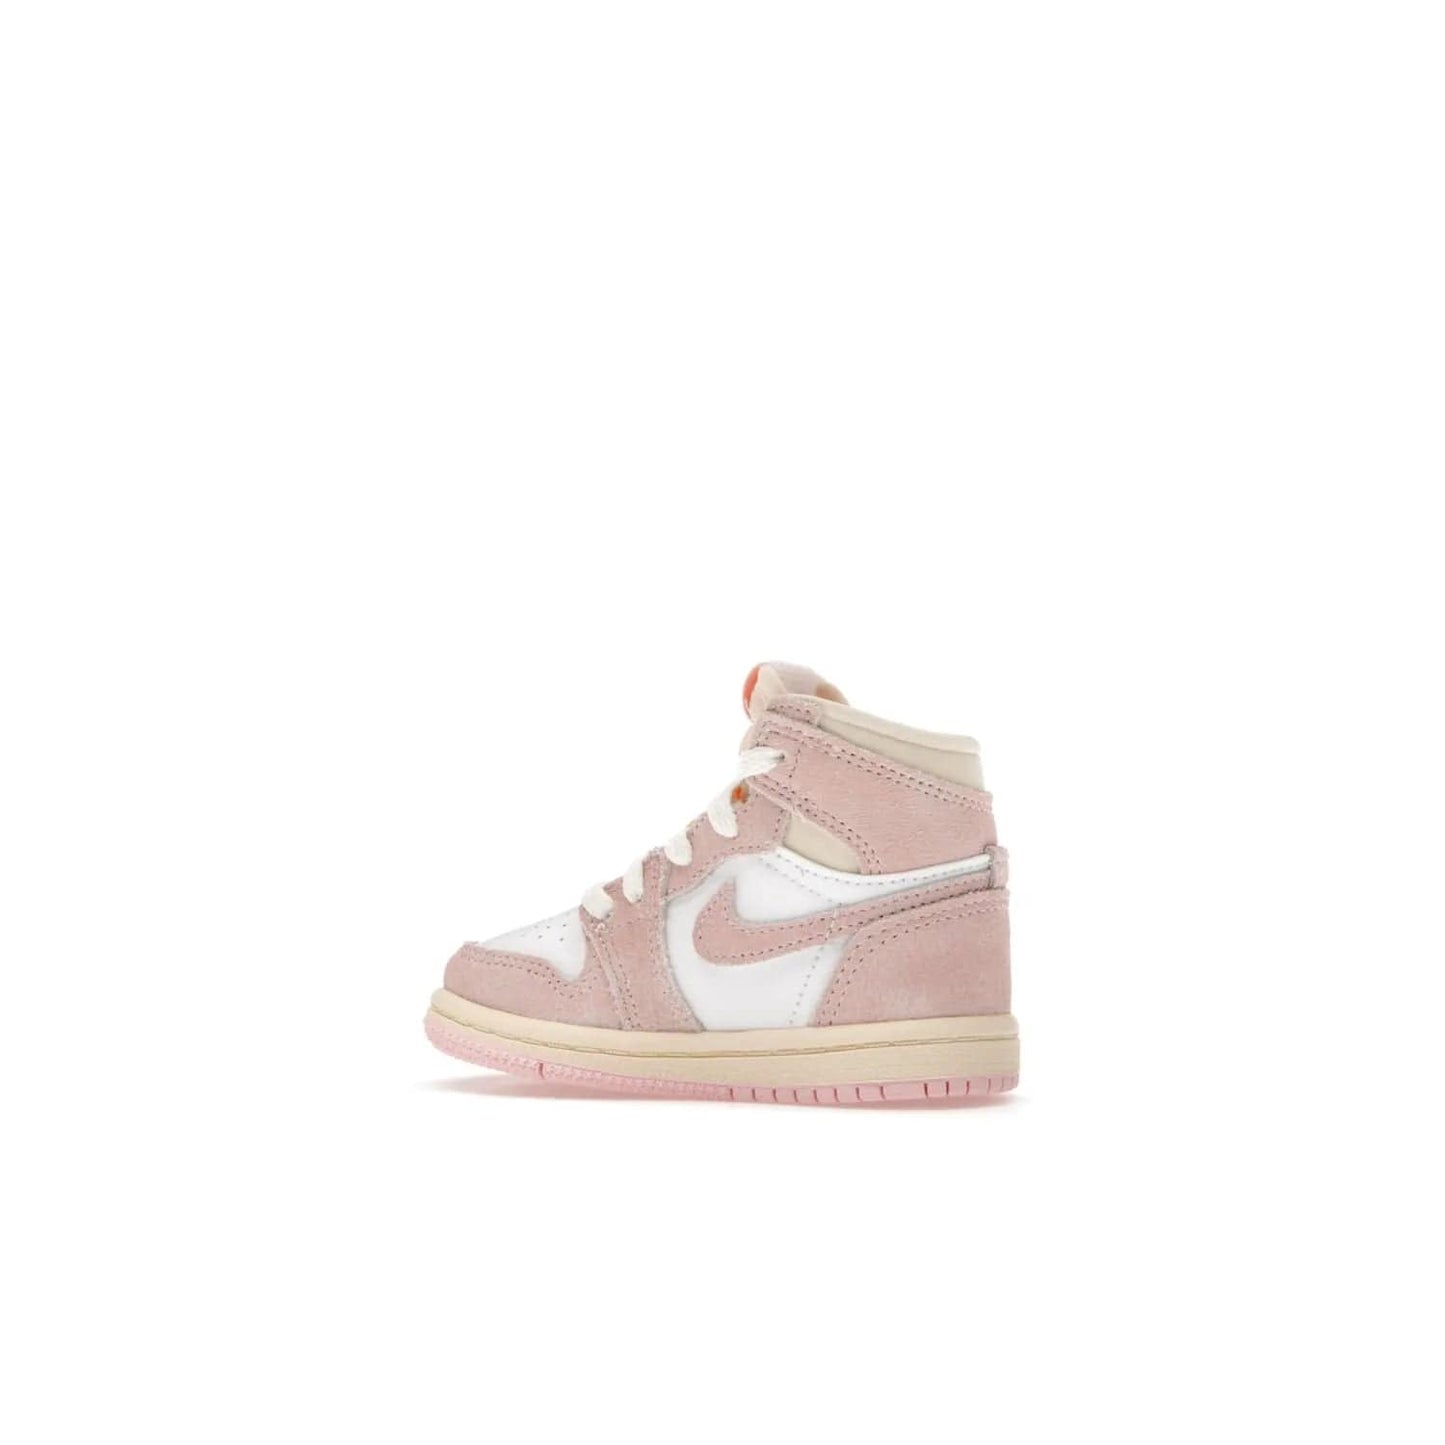 Jordan 1 Retro High OG Washed Pink (TD) - Image 21 - Only at www.BallersClubKickz.com - Retro style meets modern comfort: Introducing the Jordan 1 High OG Washed Pink (TD). Combining Atmosphere/White/Muslin/Sail colors with a high-rise silhouette, these shoes will be an instant classic when they release April 22, 2023.